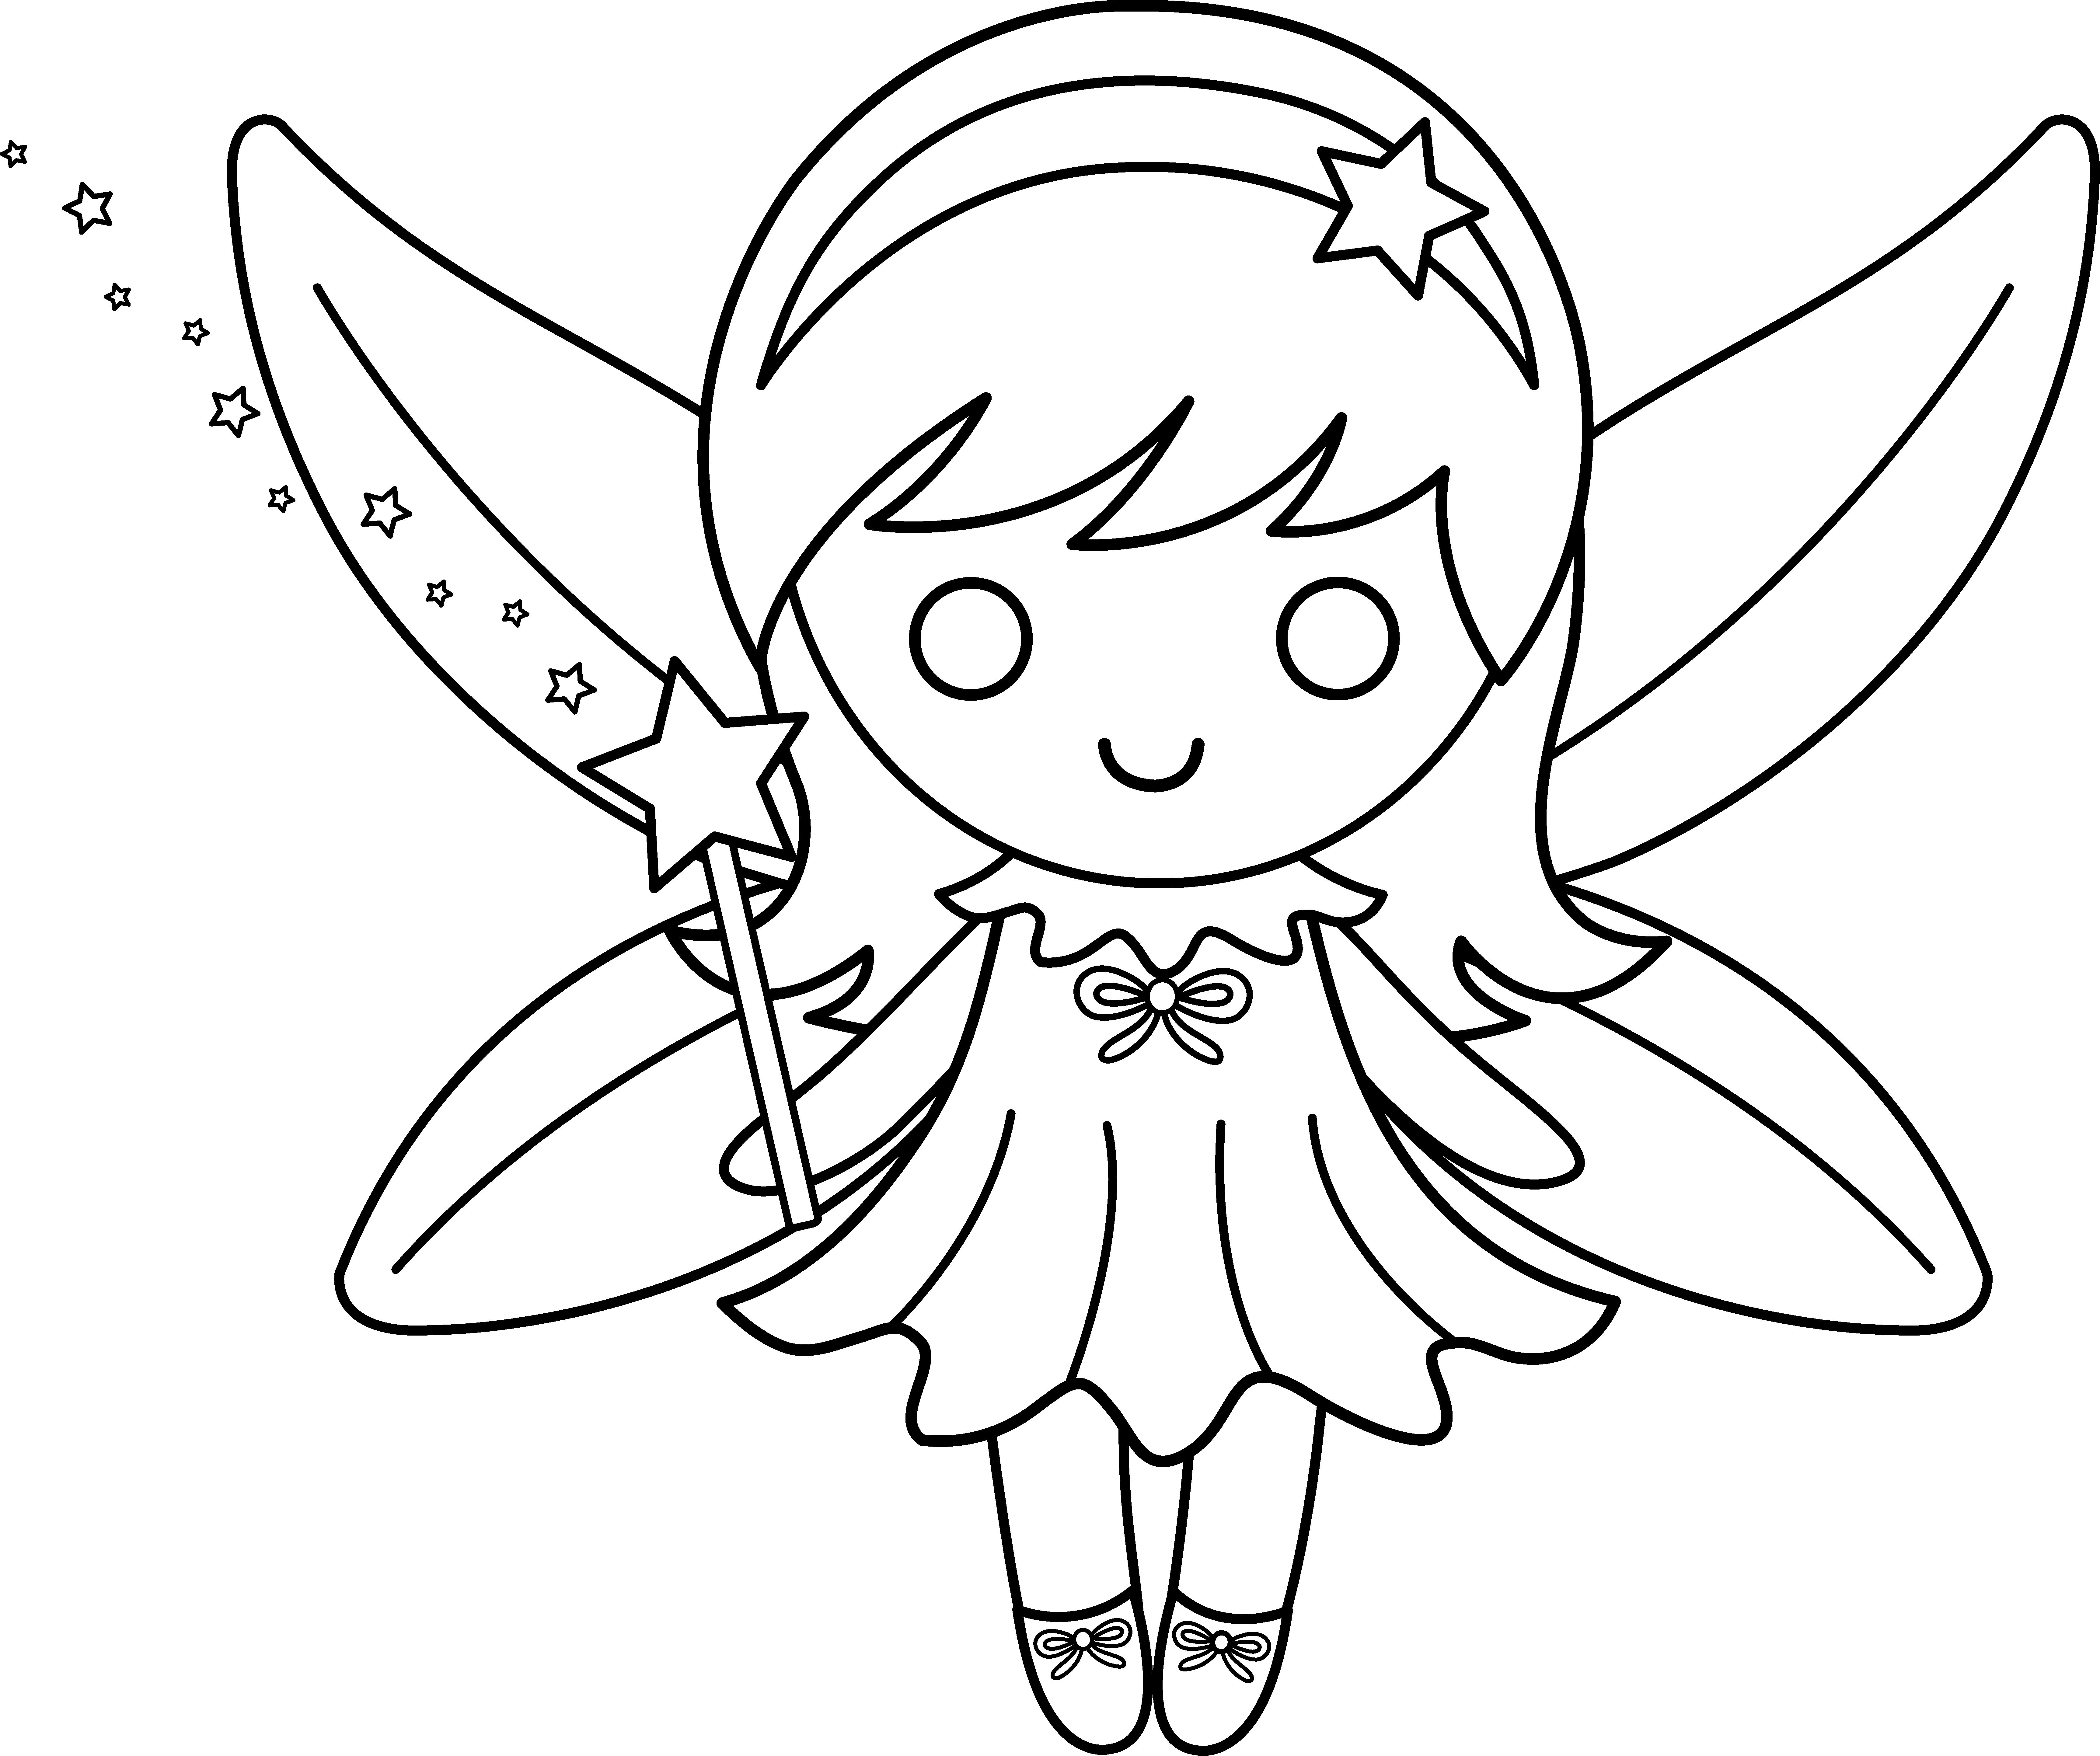 Beautiful Sketches Of Fairies | www.pixshark.com - Images Galleries With A  Bite! | Fairy drawings, Art drawings sketches simple, Beautiful sketches